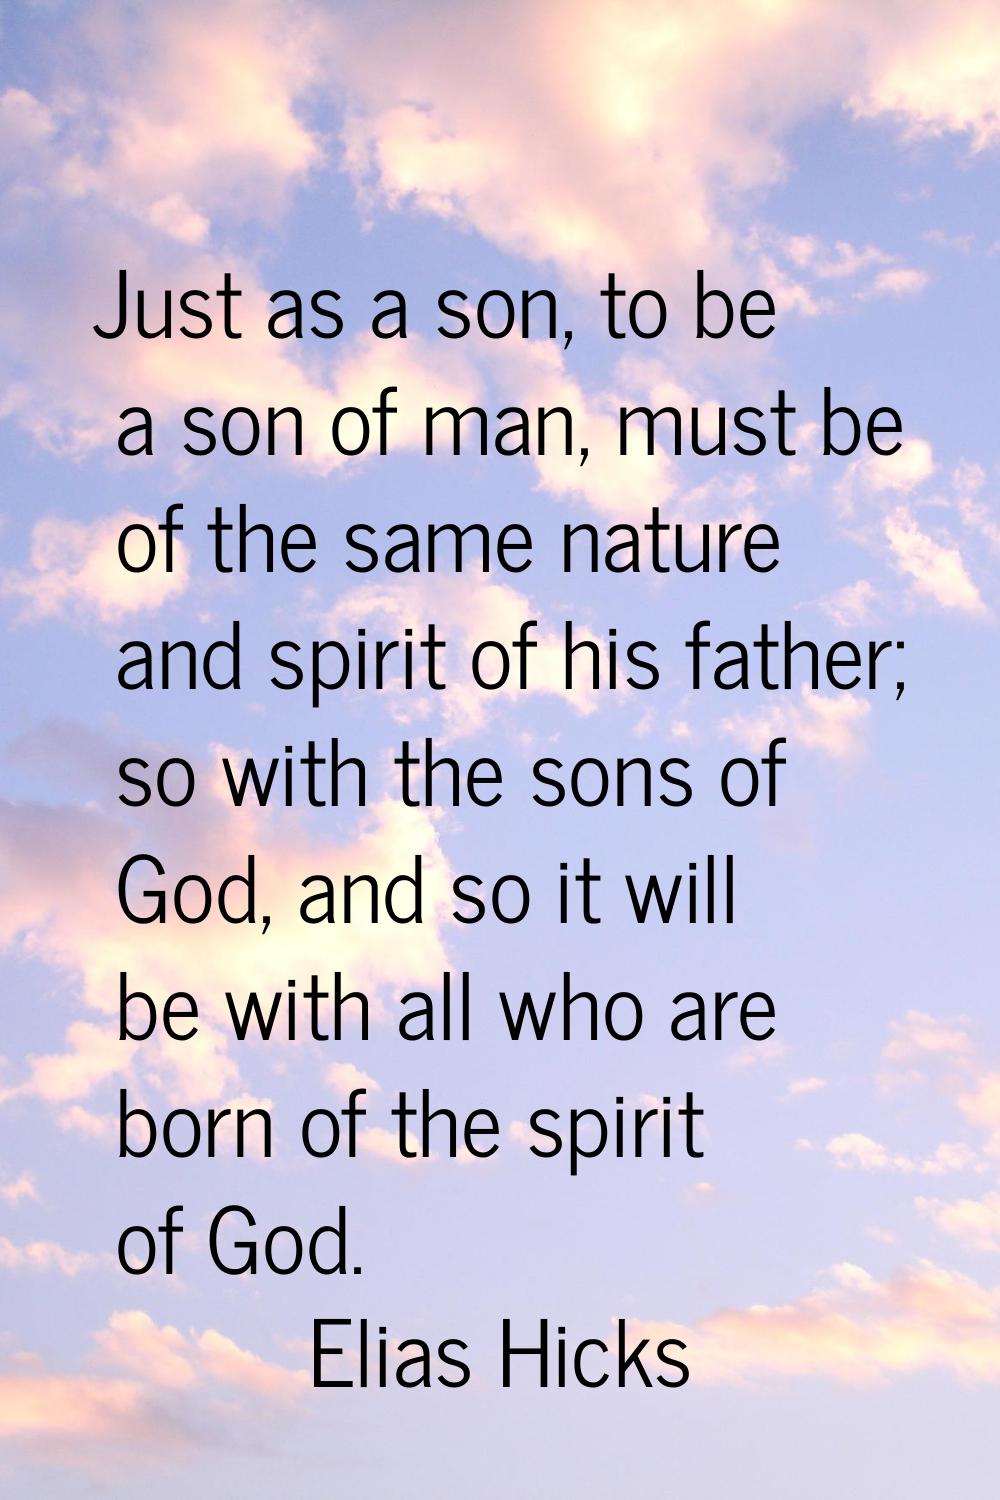 Just as a son, to be a son of man, must be of the same nature and spirit of his father; so with the